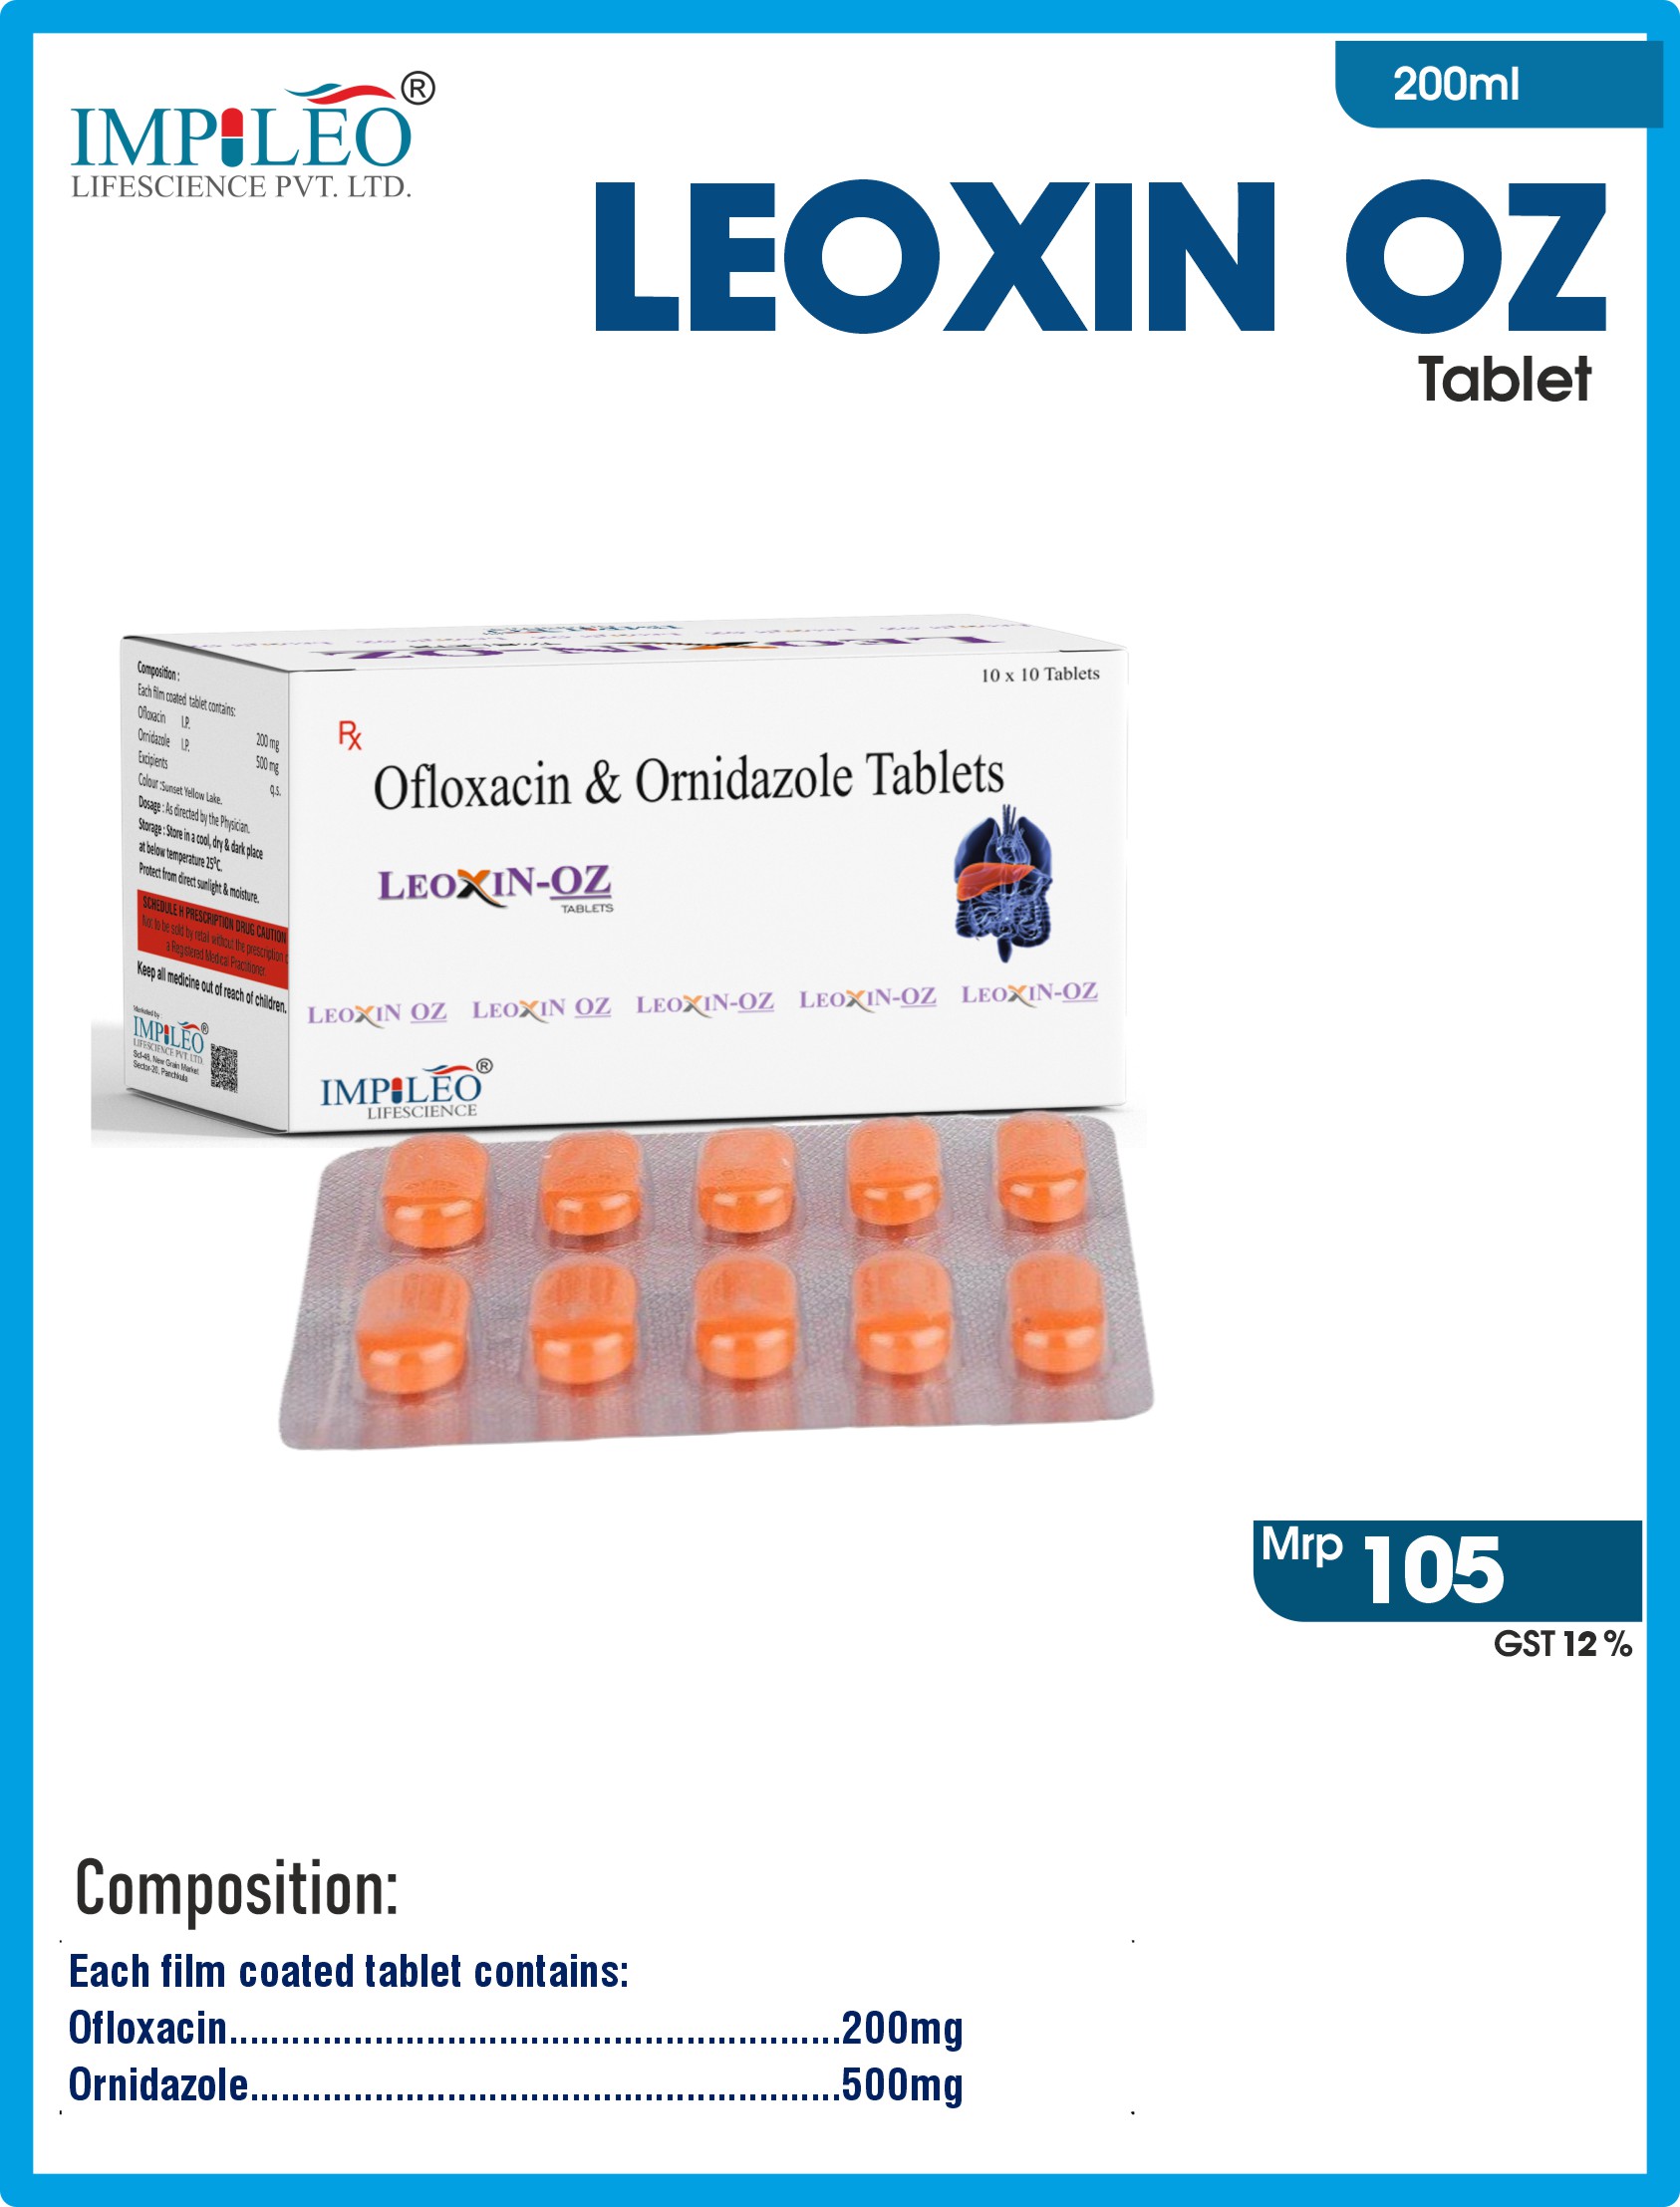  Discover Peak Wellness: Experience the Superiority of LEOXIN OZ Tablets from Baddi's Premier Third-Party Manufacturer